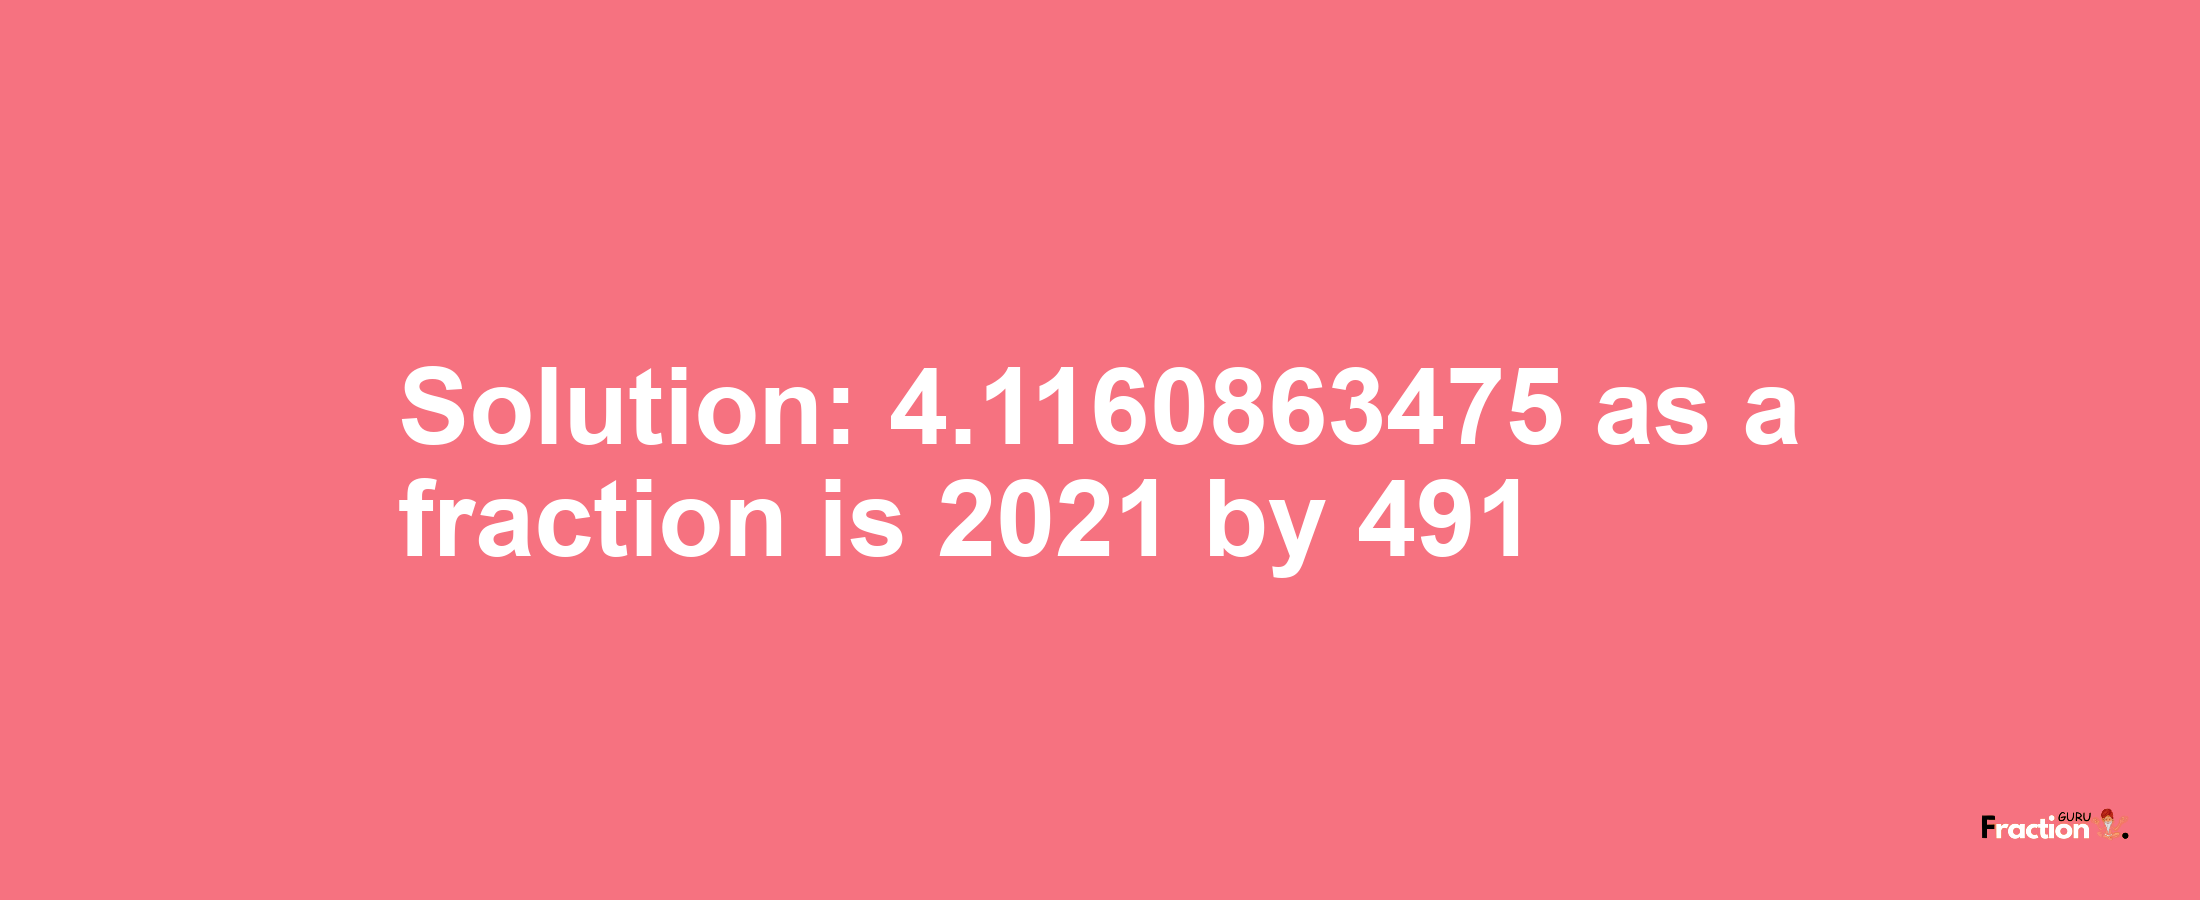 Solution:4.1160863475 as a fraction is 2021/491